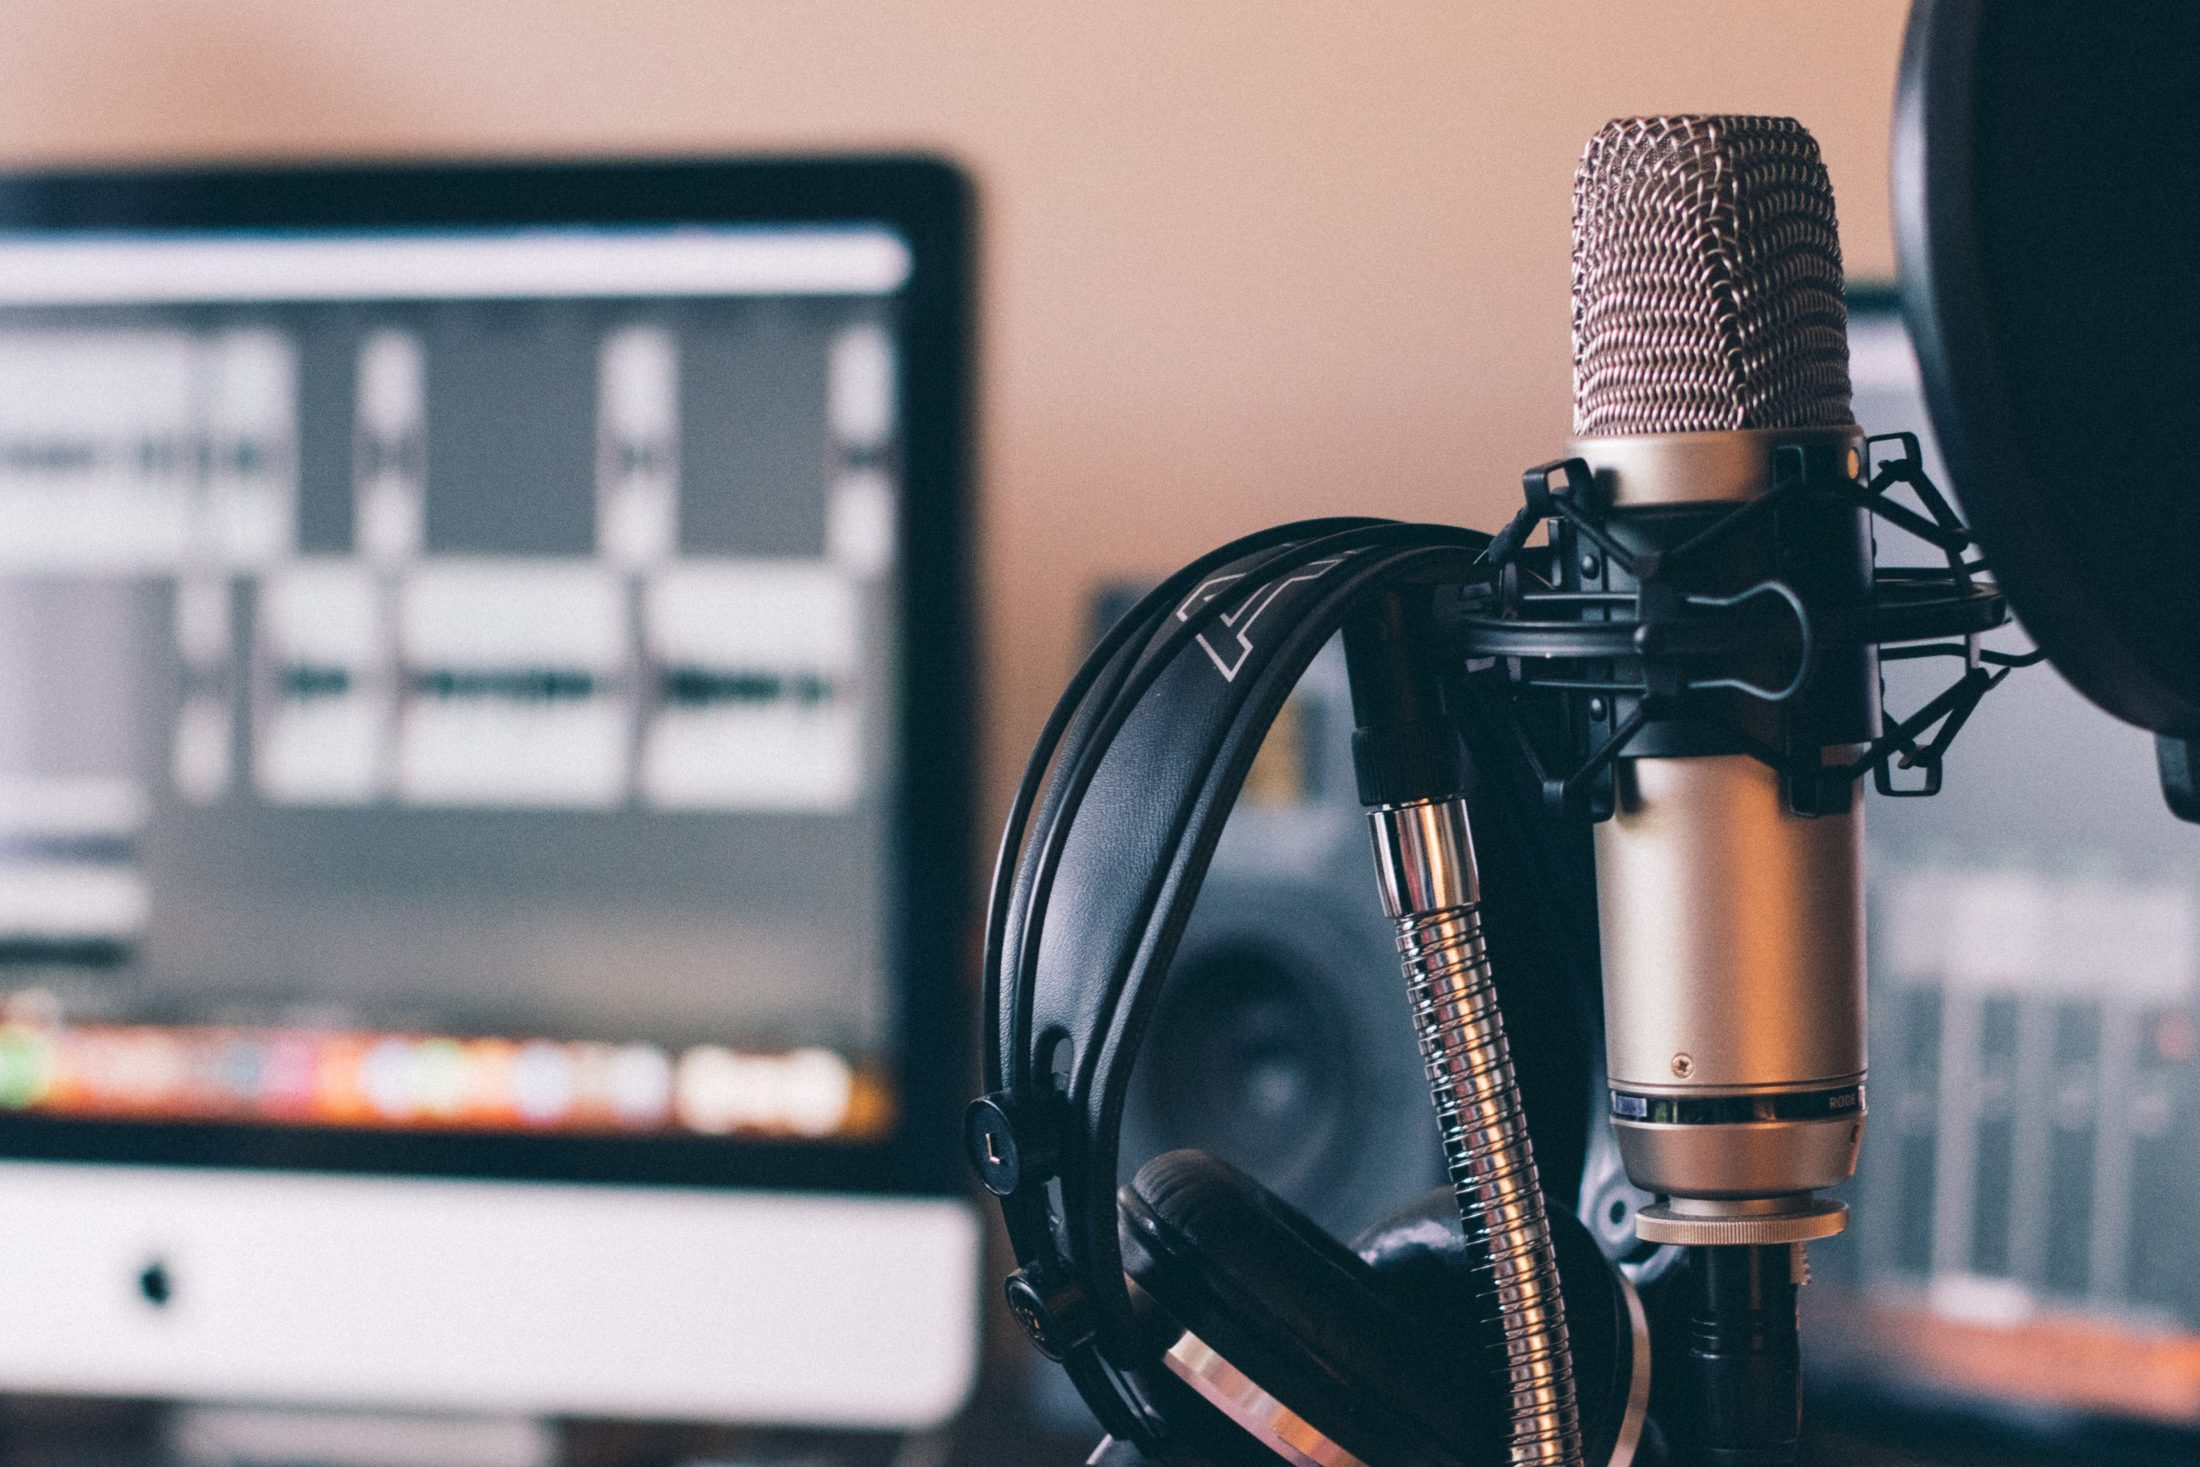 Podcast production and growth